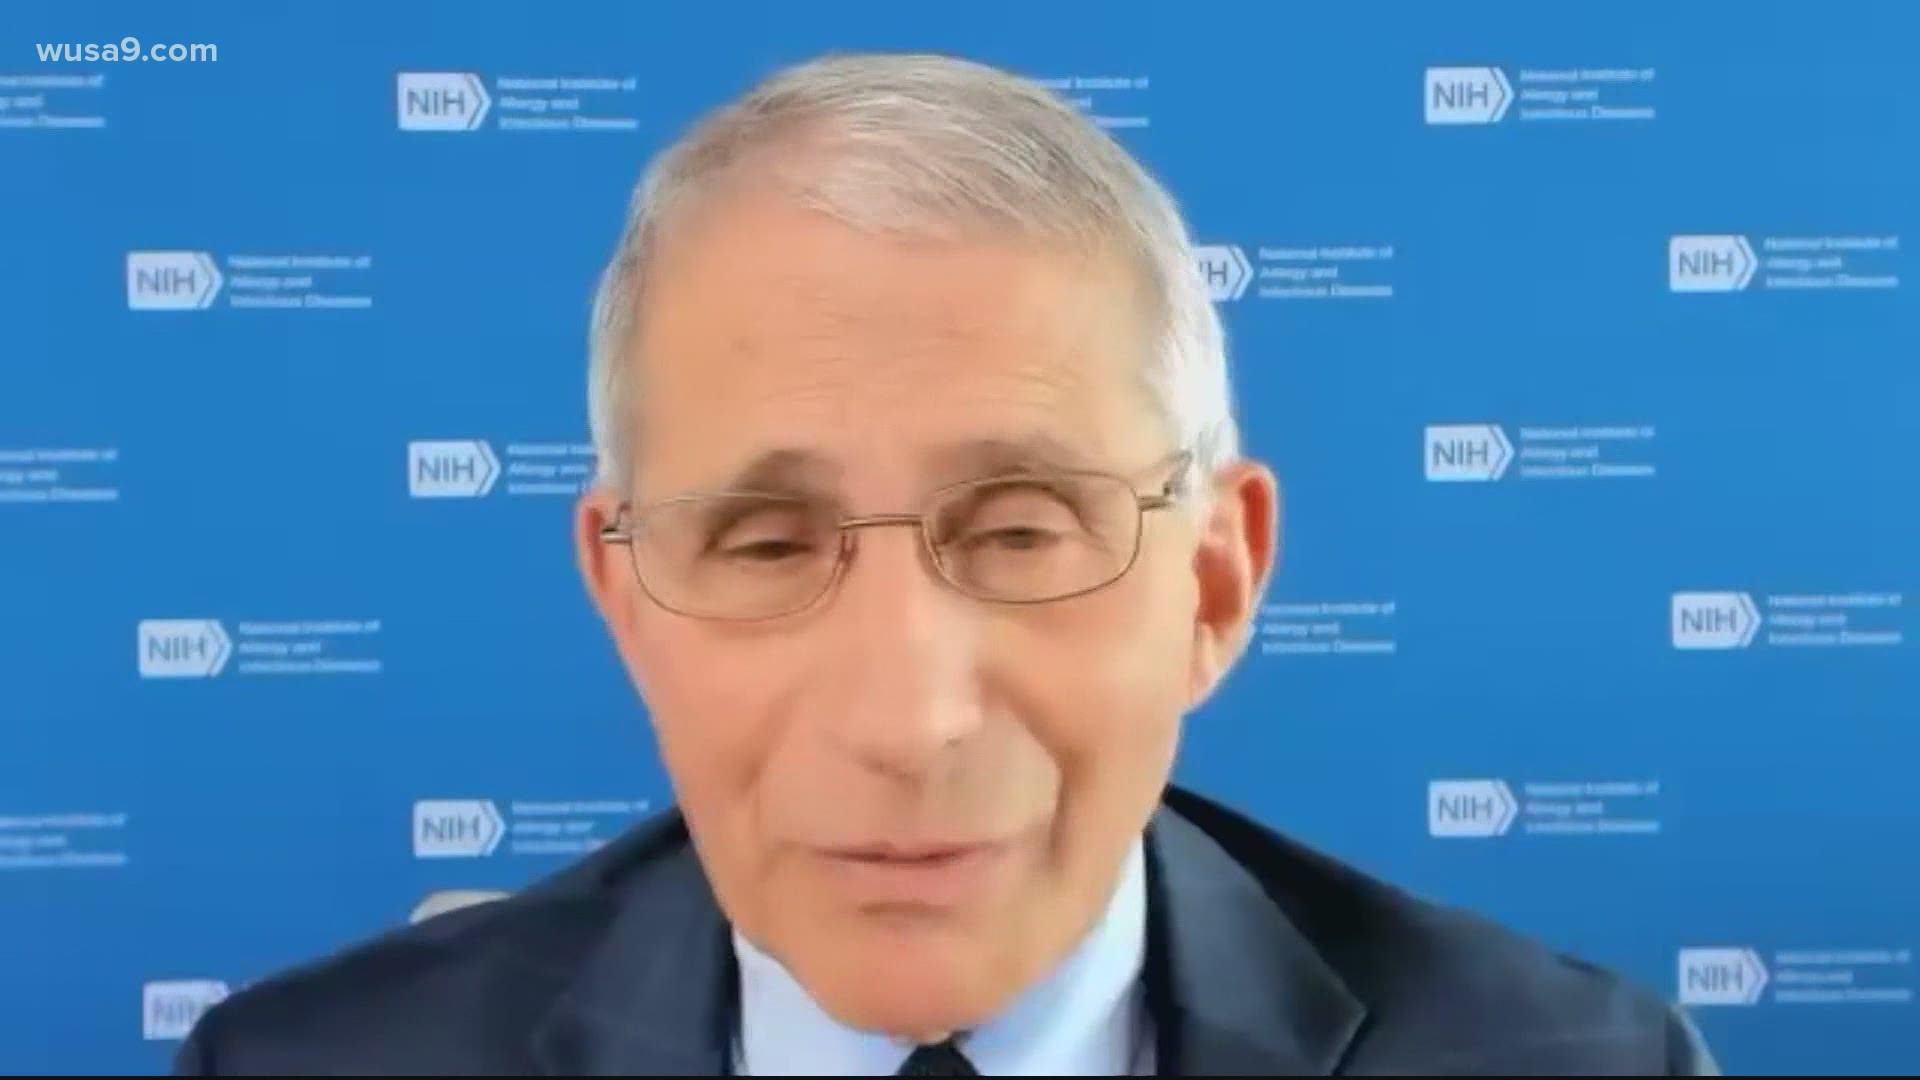 Fauci chatted 1-1 with WUSA9 about his extensive recommendations for Thanksgiving plans, including why his own daughters won't be coming home this year.